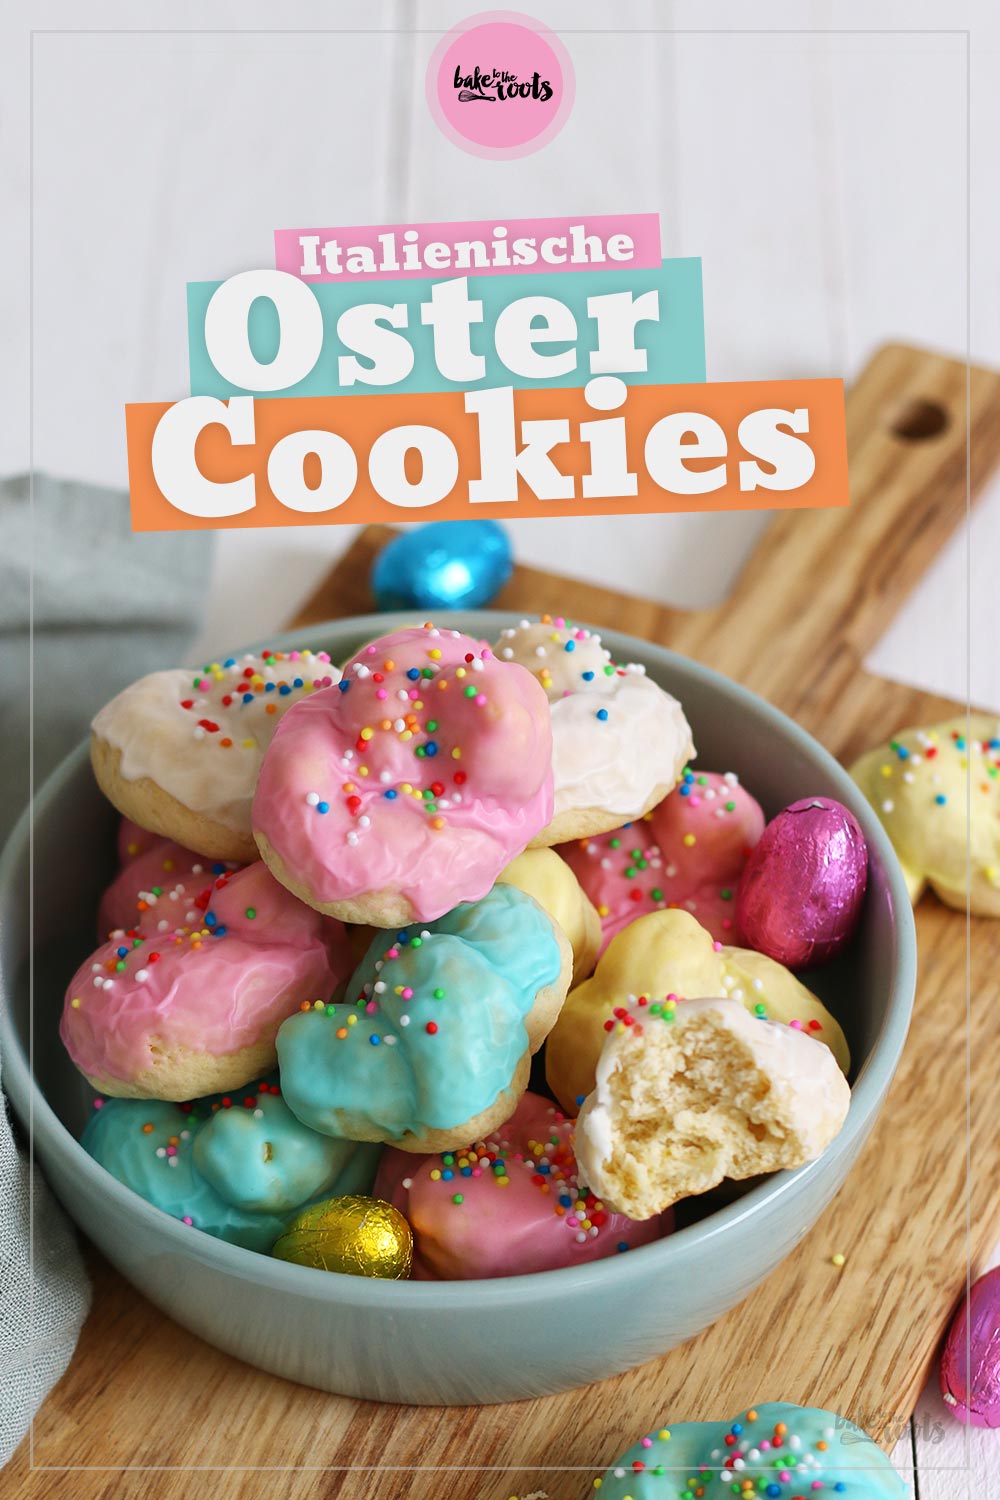 Italienische Oster Cookies | Bake to the roots